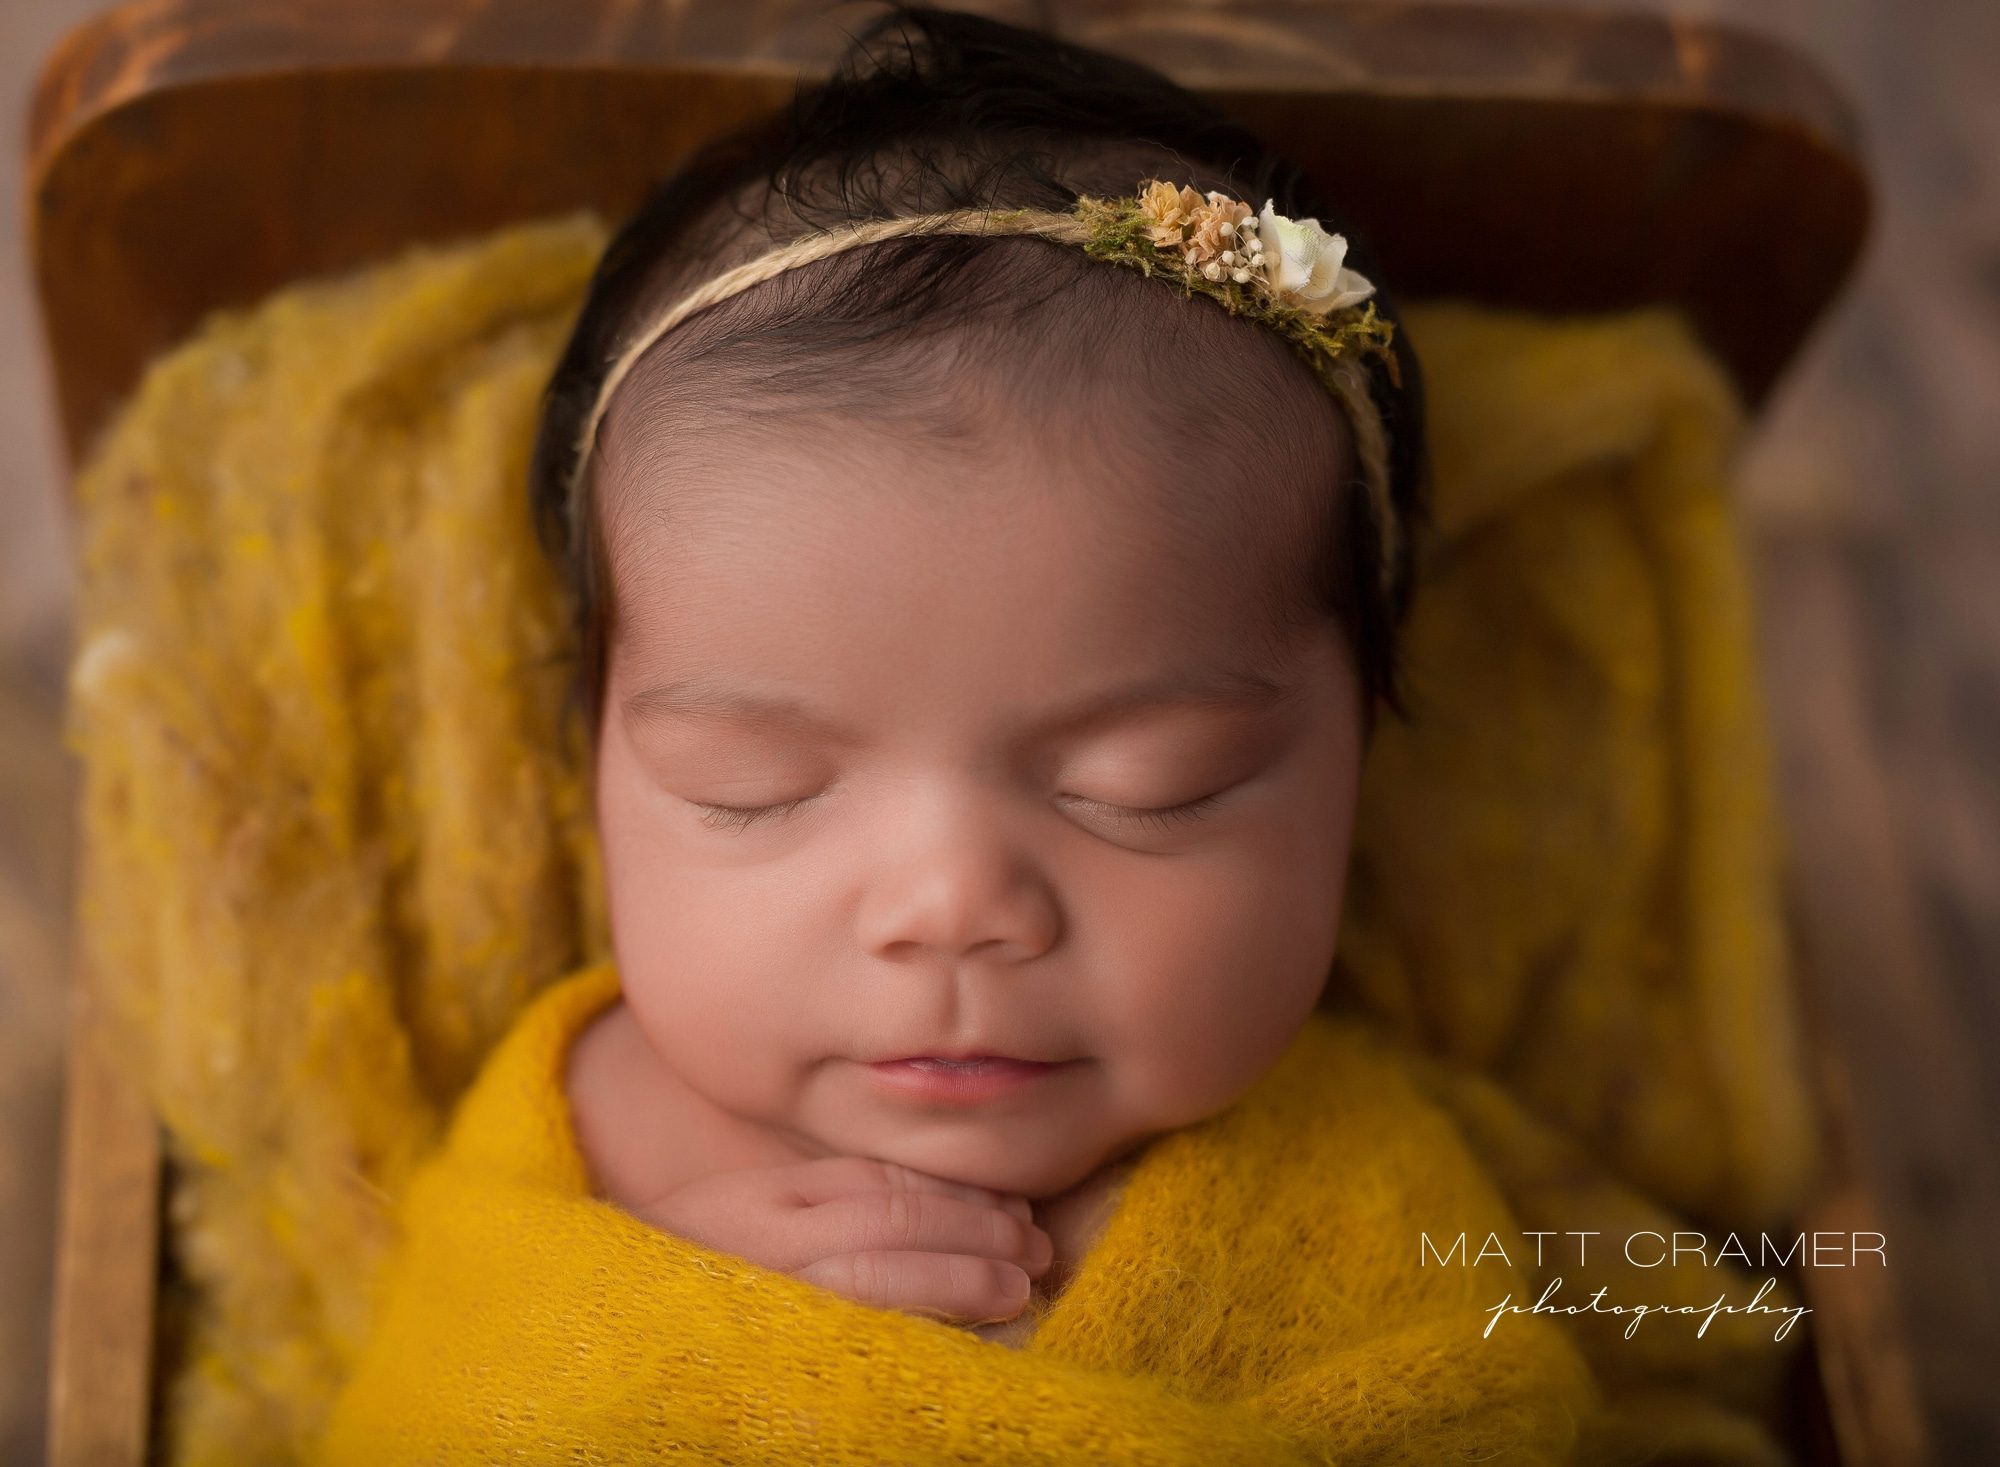 Newborn baby girl swaddled and wrapped in yellow fabric sleeping in wood baby bed photography prop during her Newborn Photography session in Los Angeles